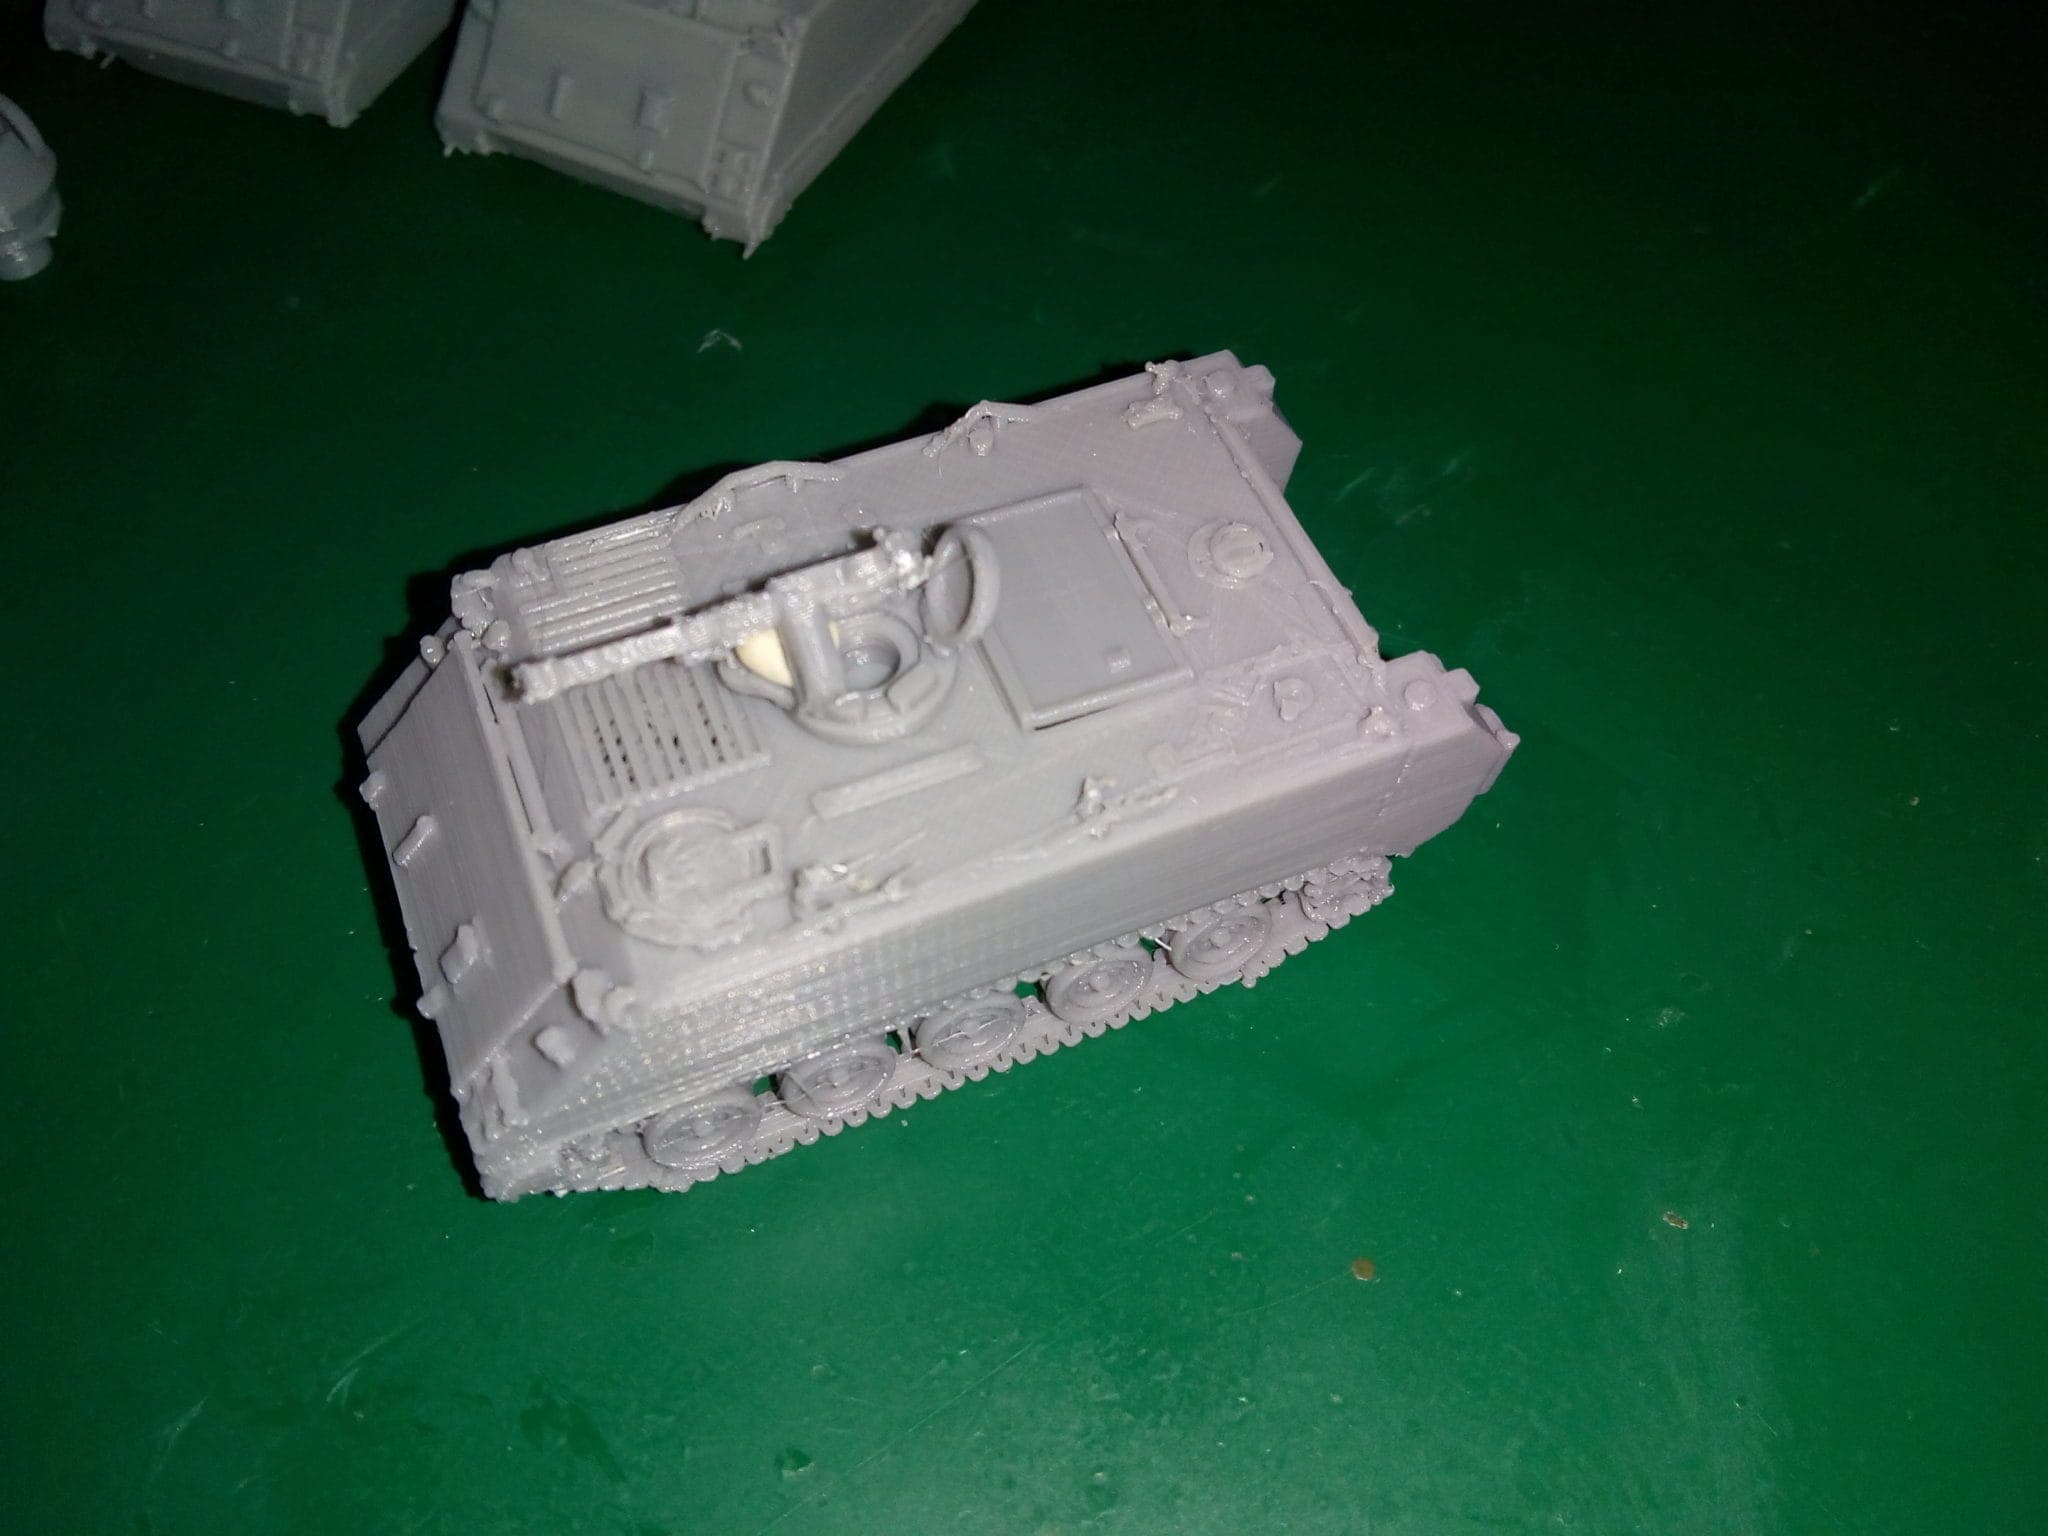 M113 APC scaled at 1:50th suitable for wargames,bolt action 